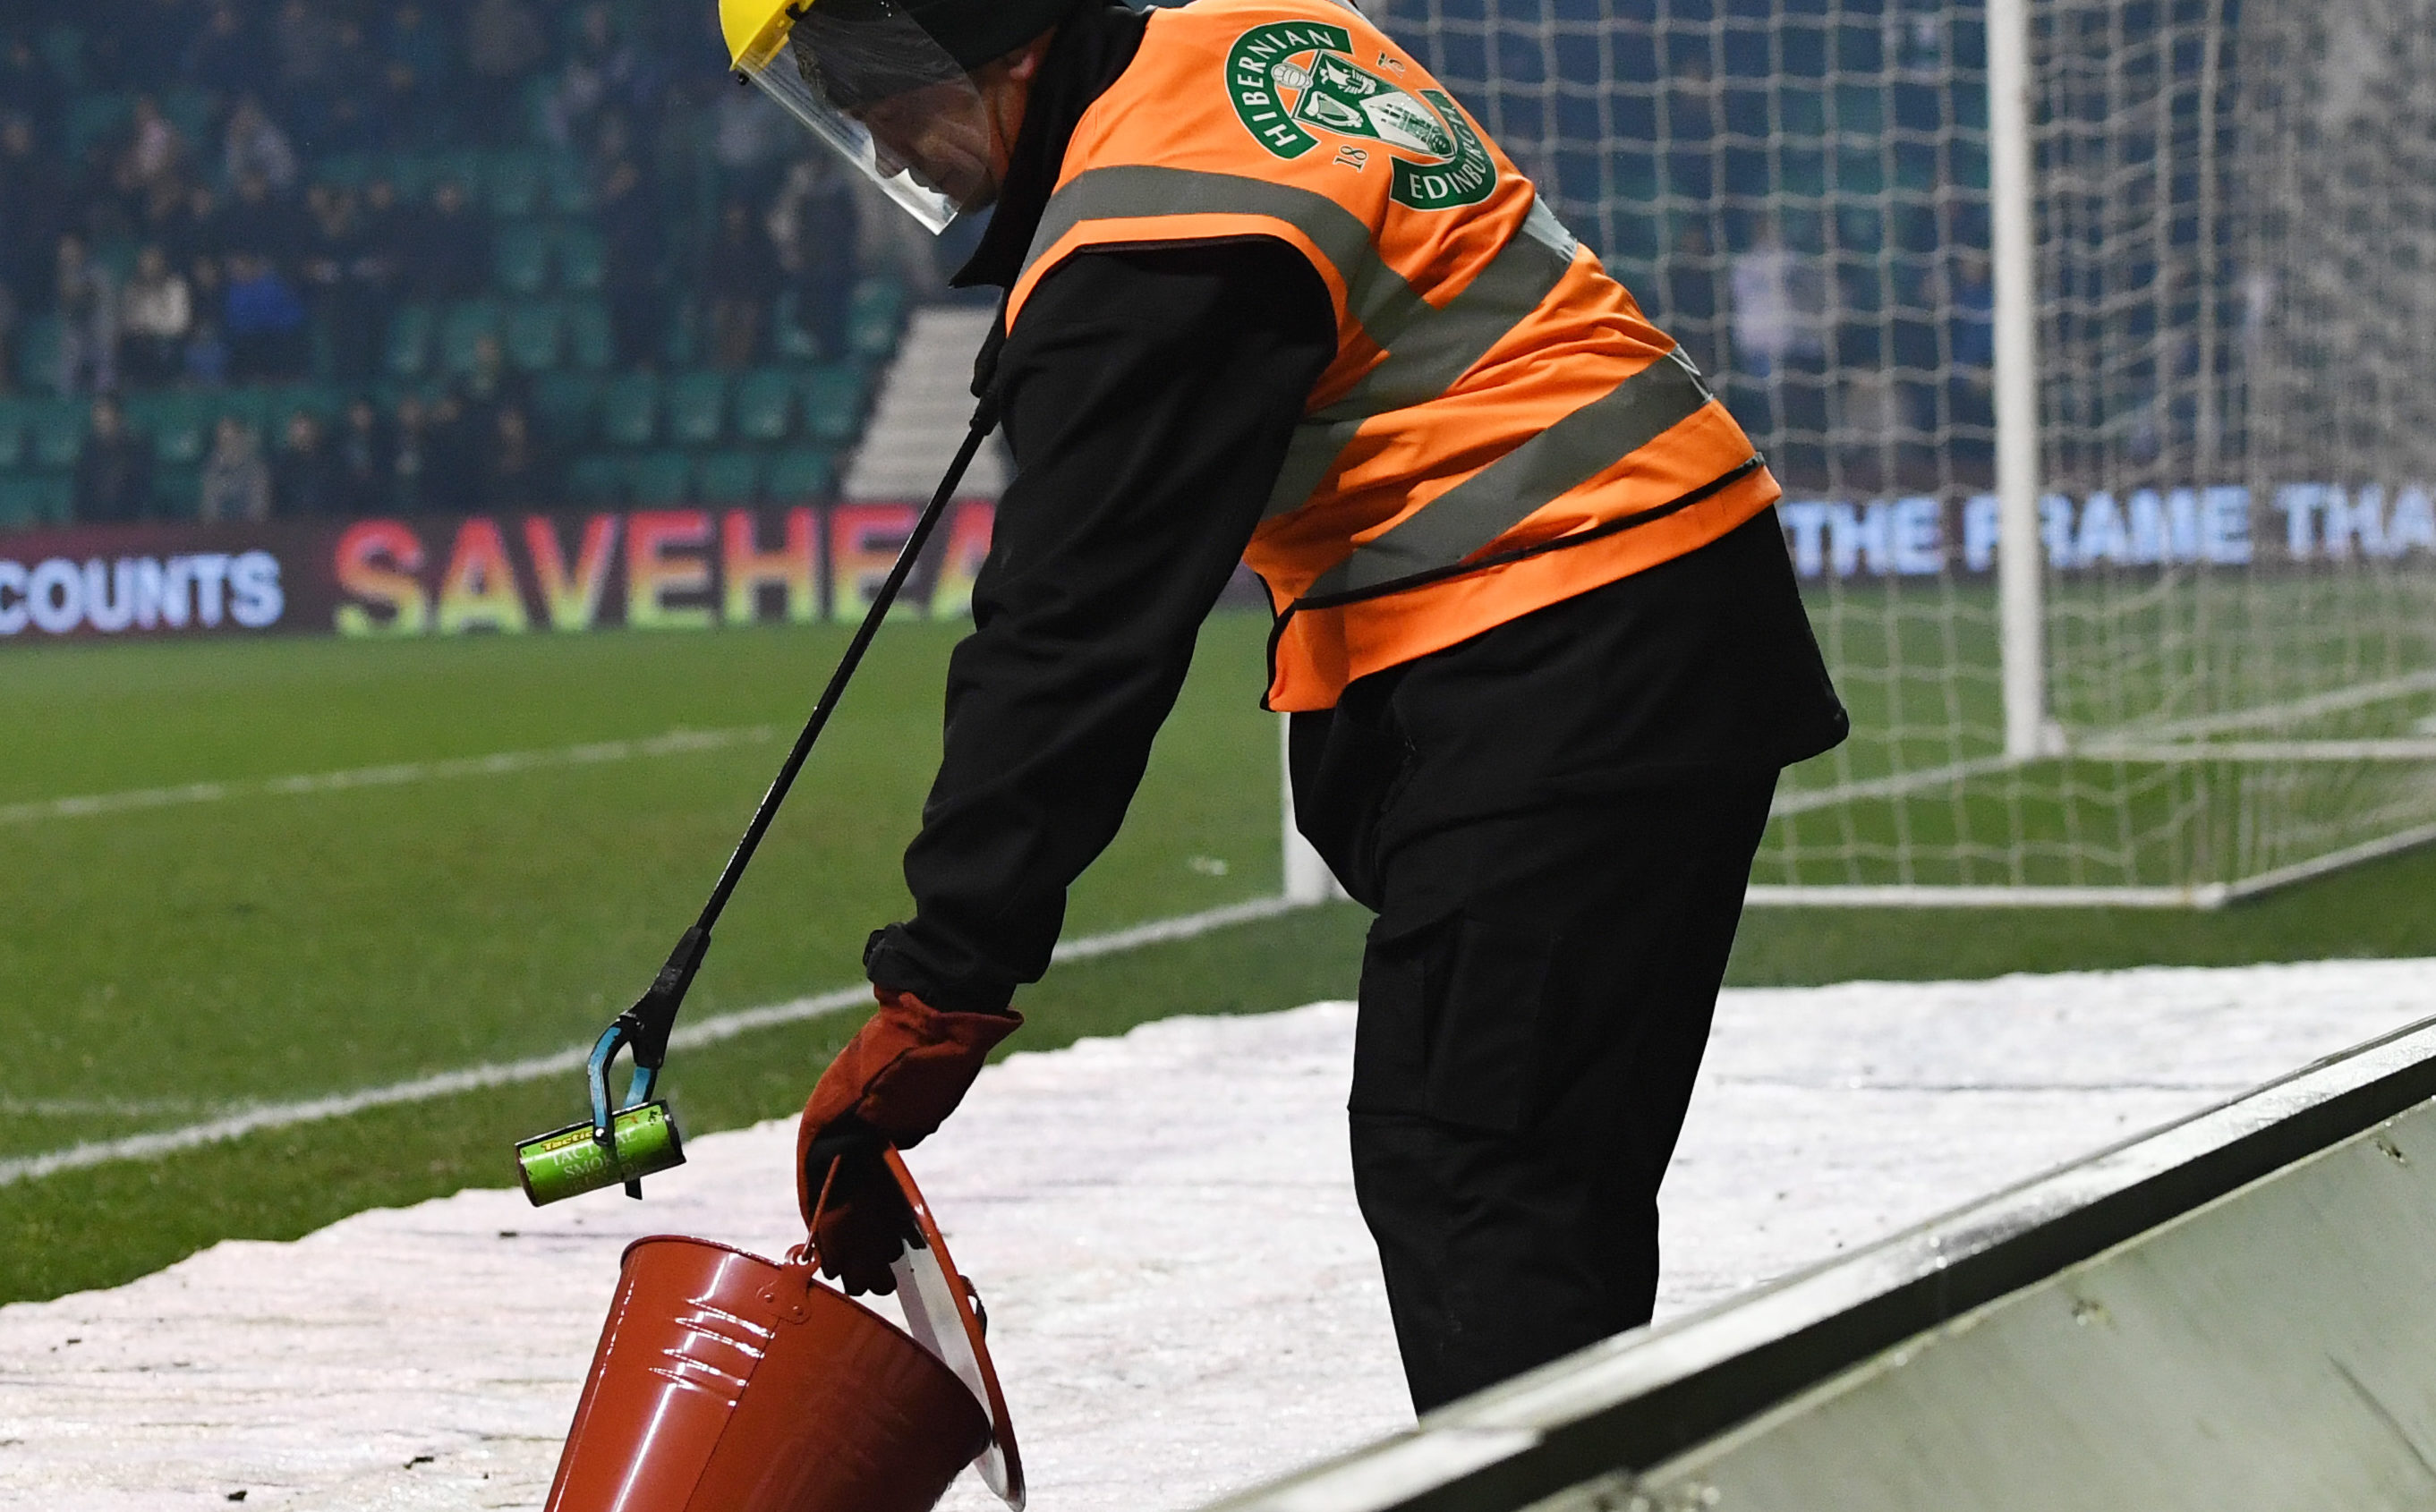 A flare is doused 
at Hibs-Celtic cup tie last month